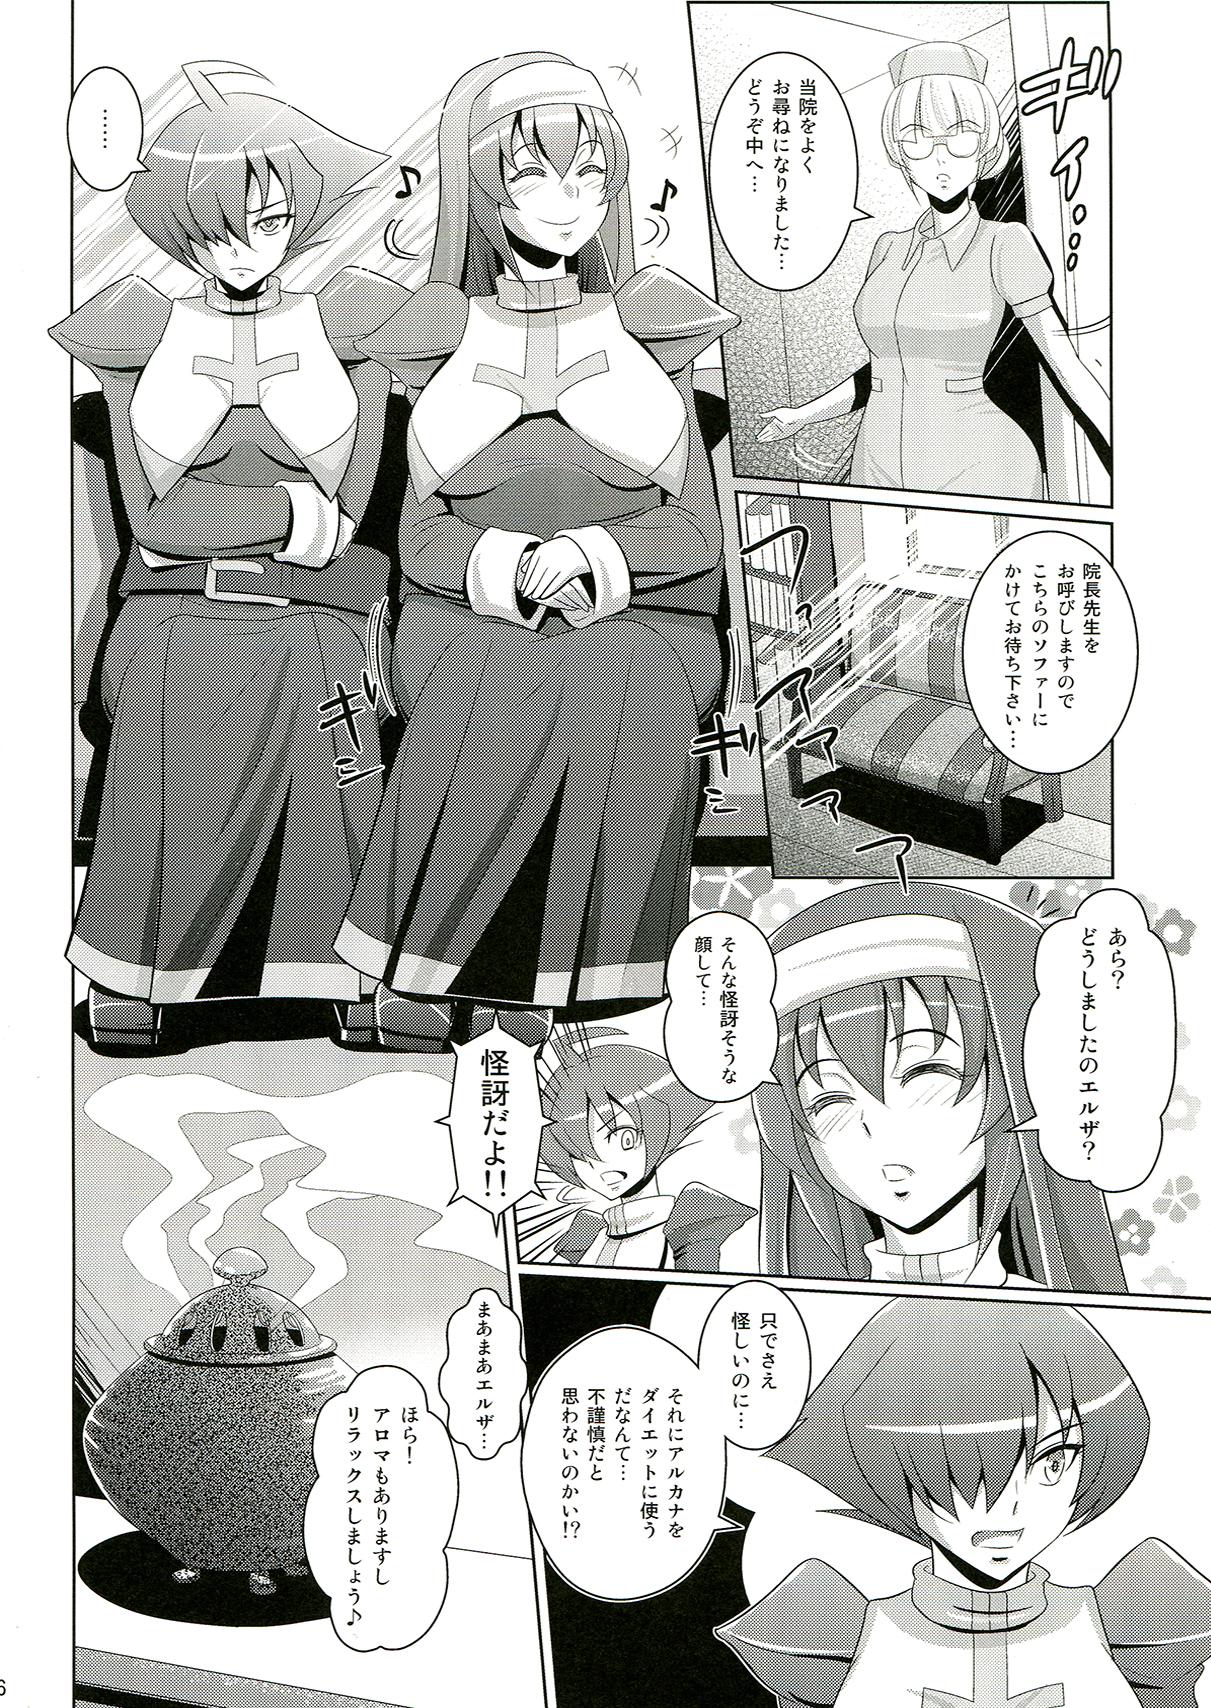 Muscles Botebote Clarice - Arcana heart Cameltoe - Page 5